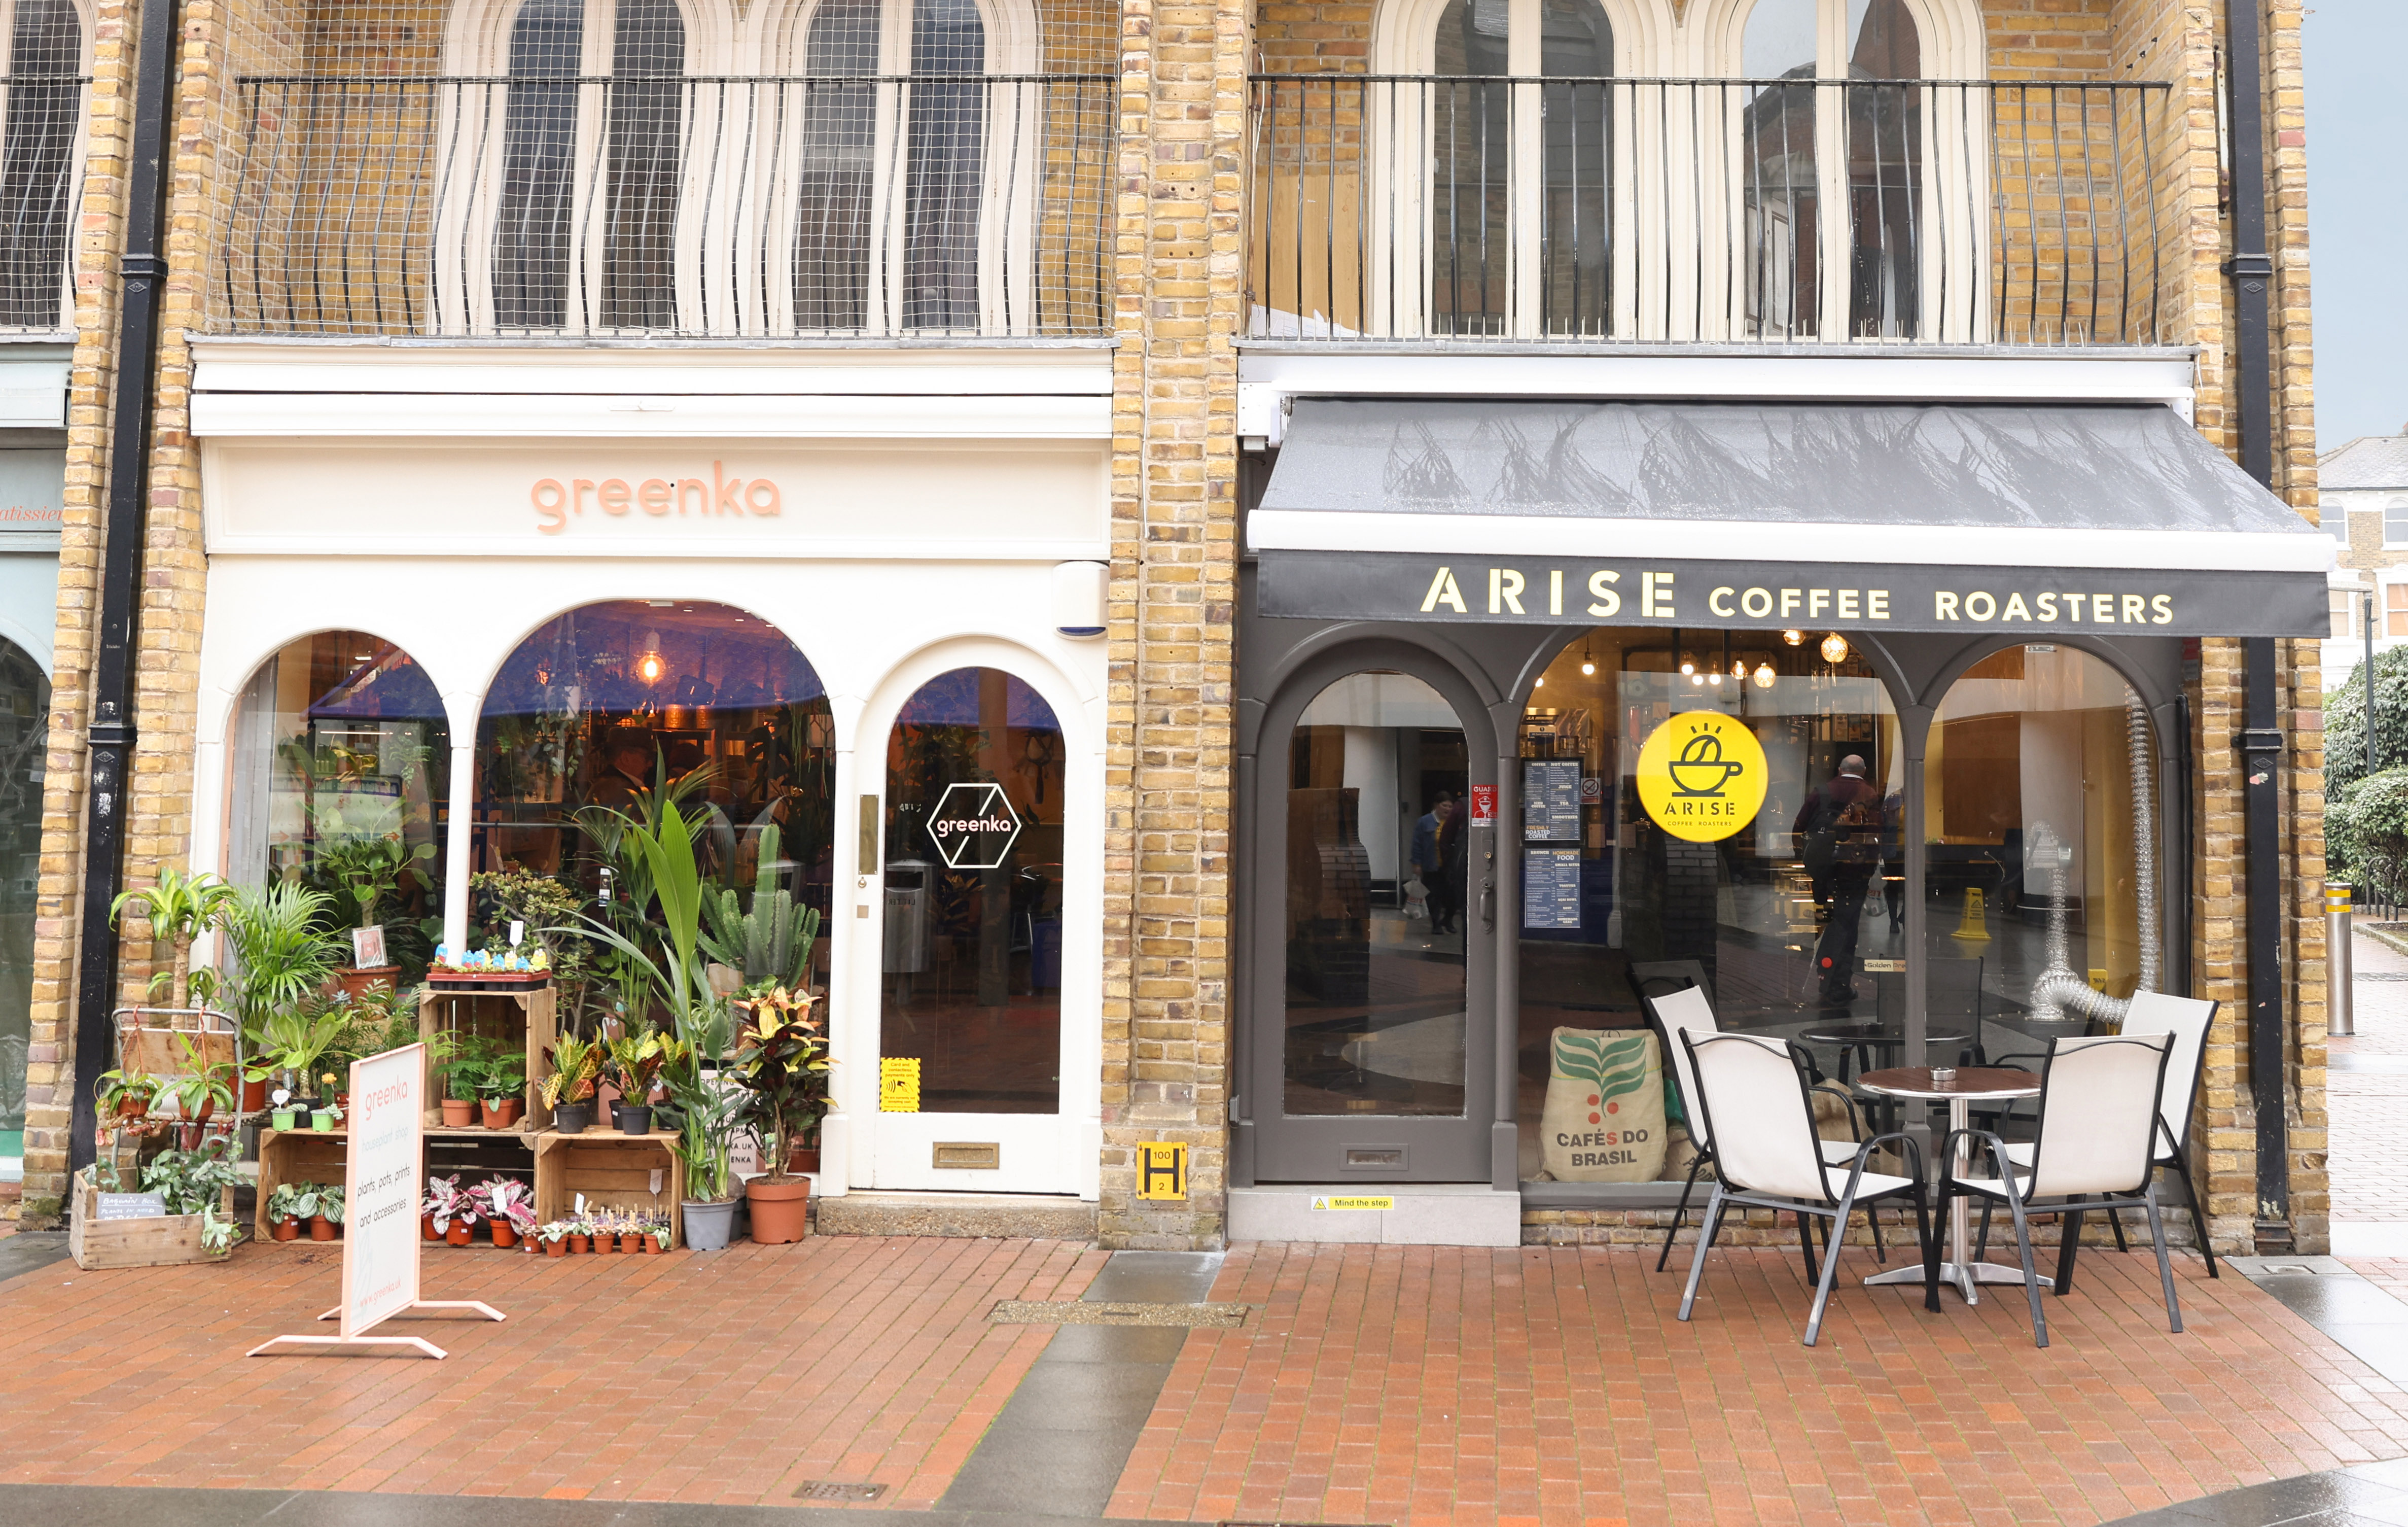 Greenka, Arise and Benji's Buns can all be found in Oak Road, Ealing.